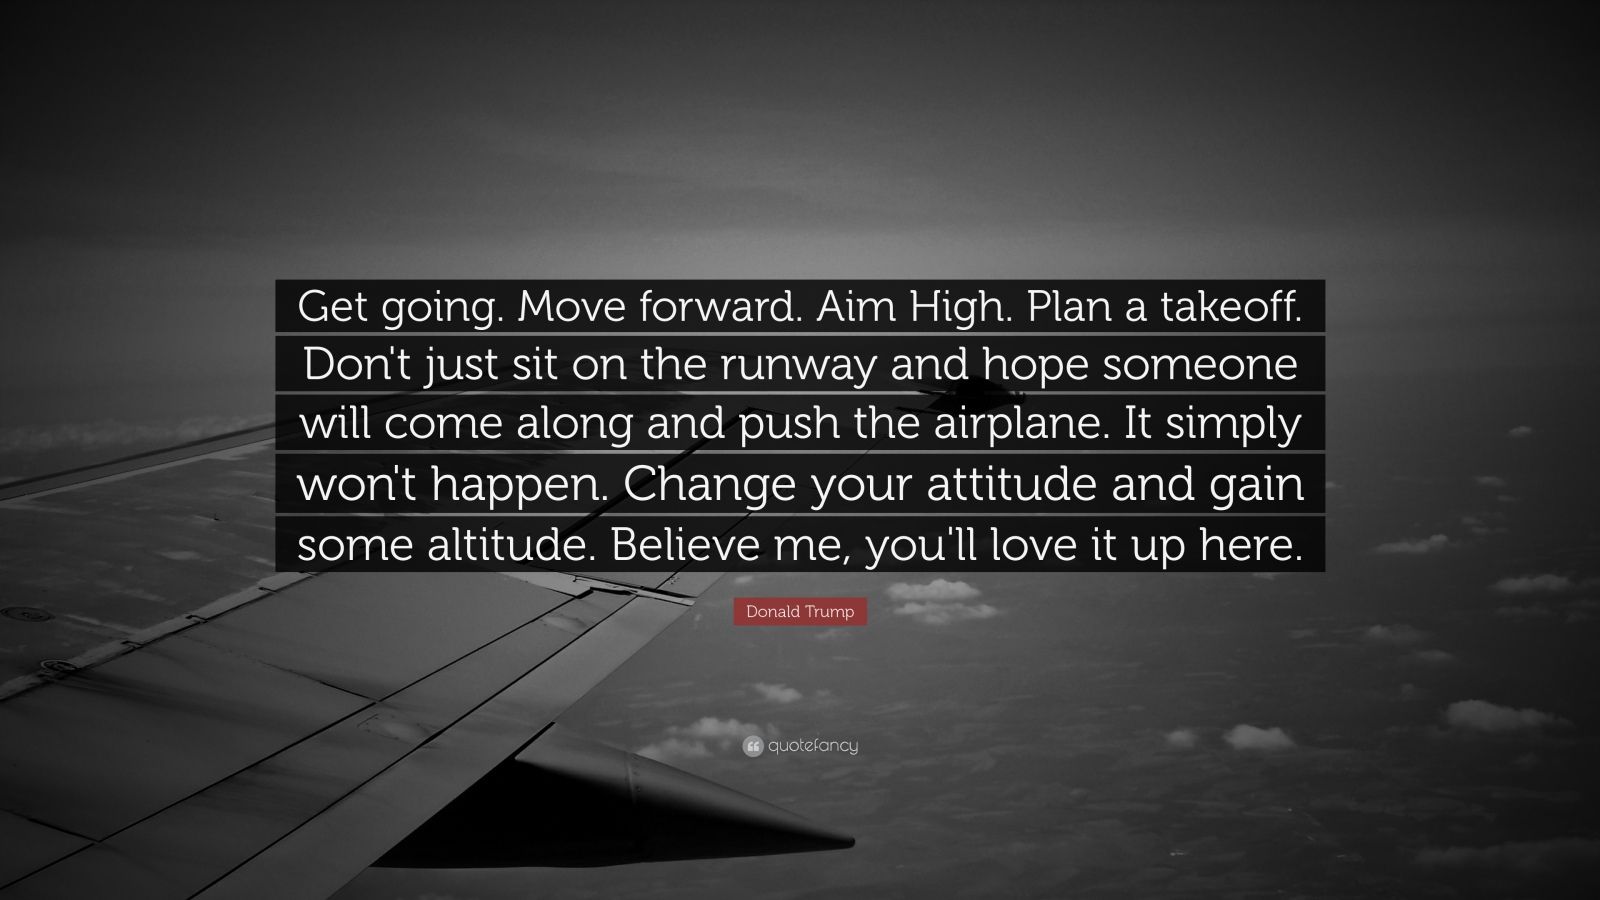 Donald Trump Quote: “Get going. Move forward. Aim High. Plan a takeoff